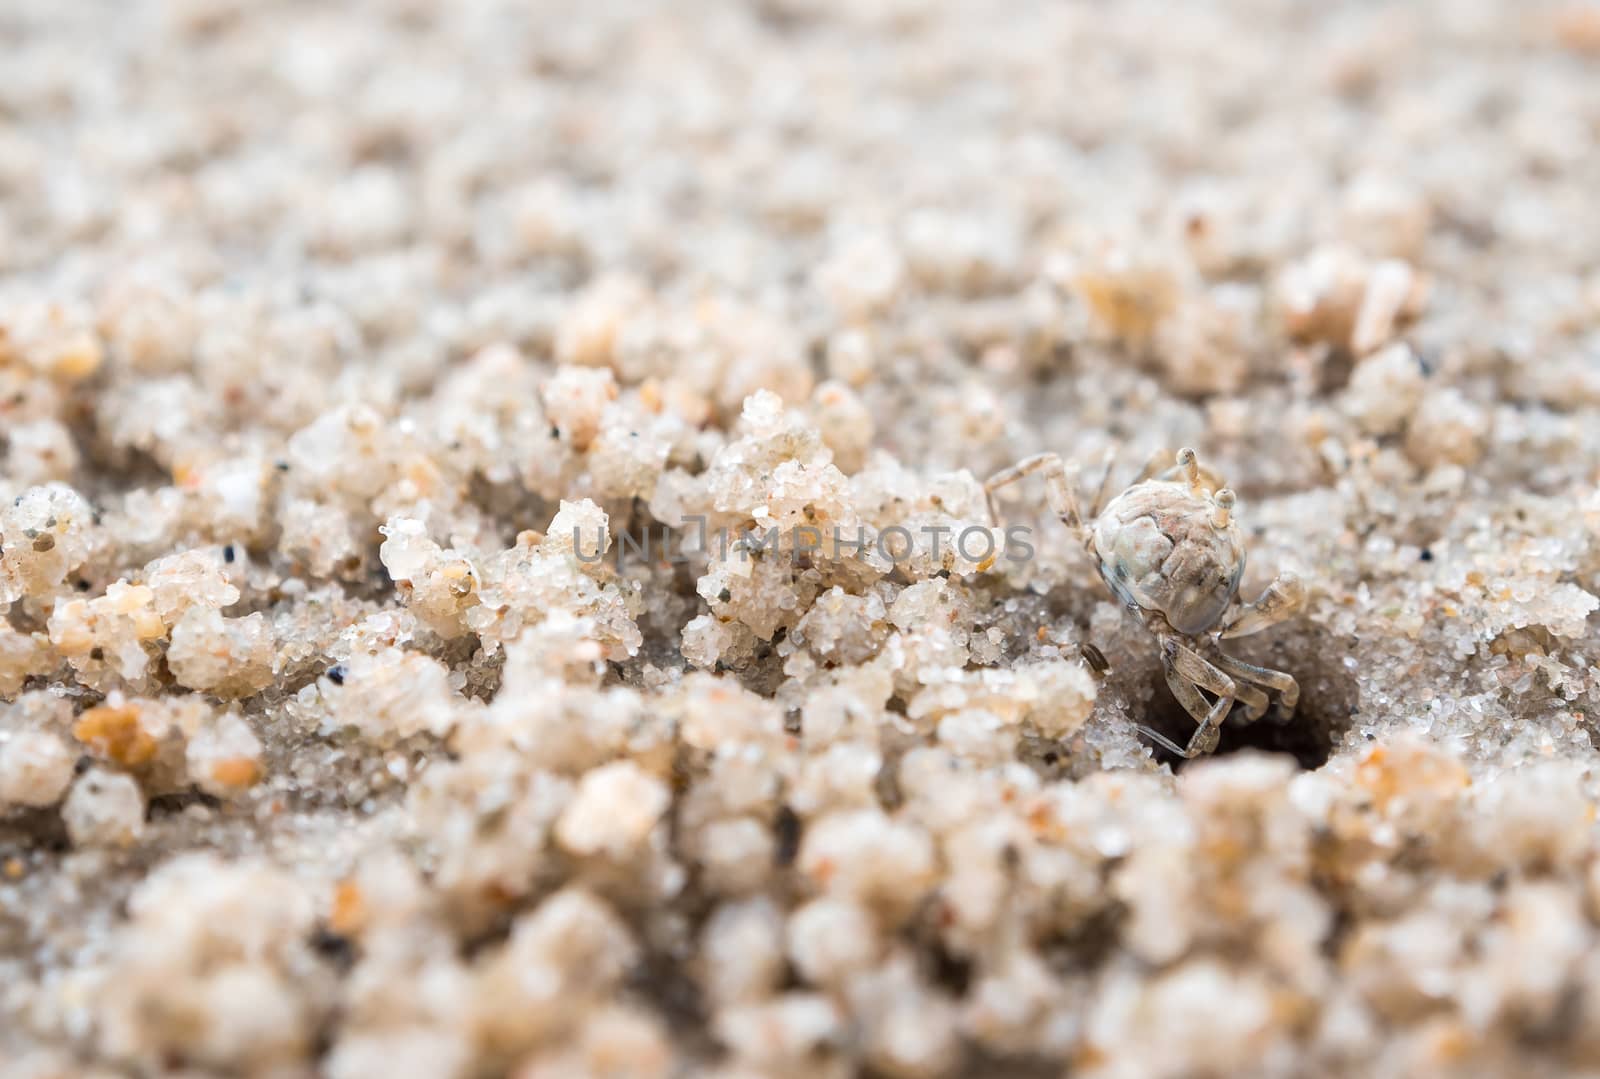 Small crab eating on sand, Close to their holes on the beach